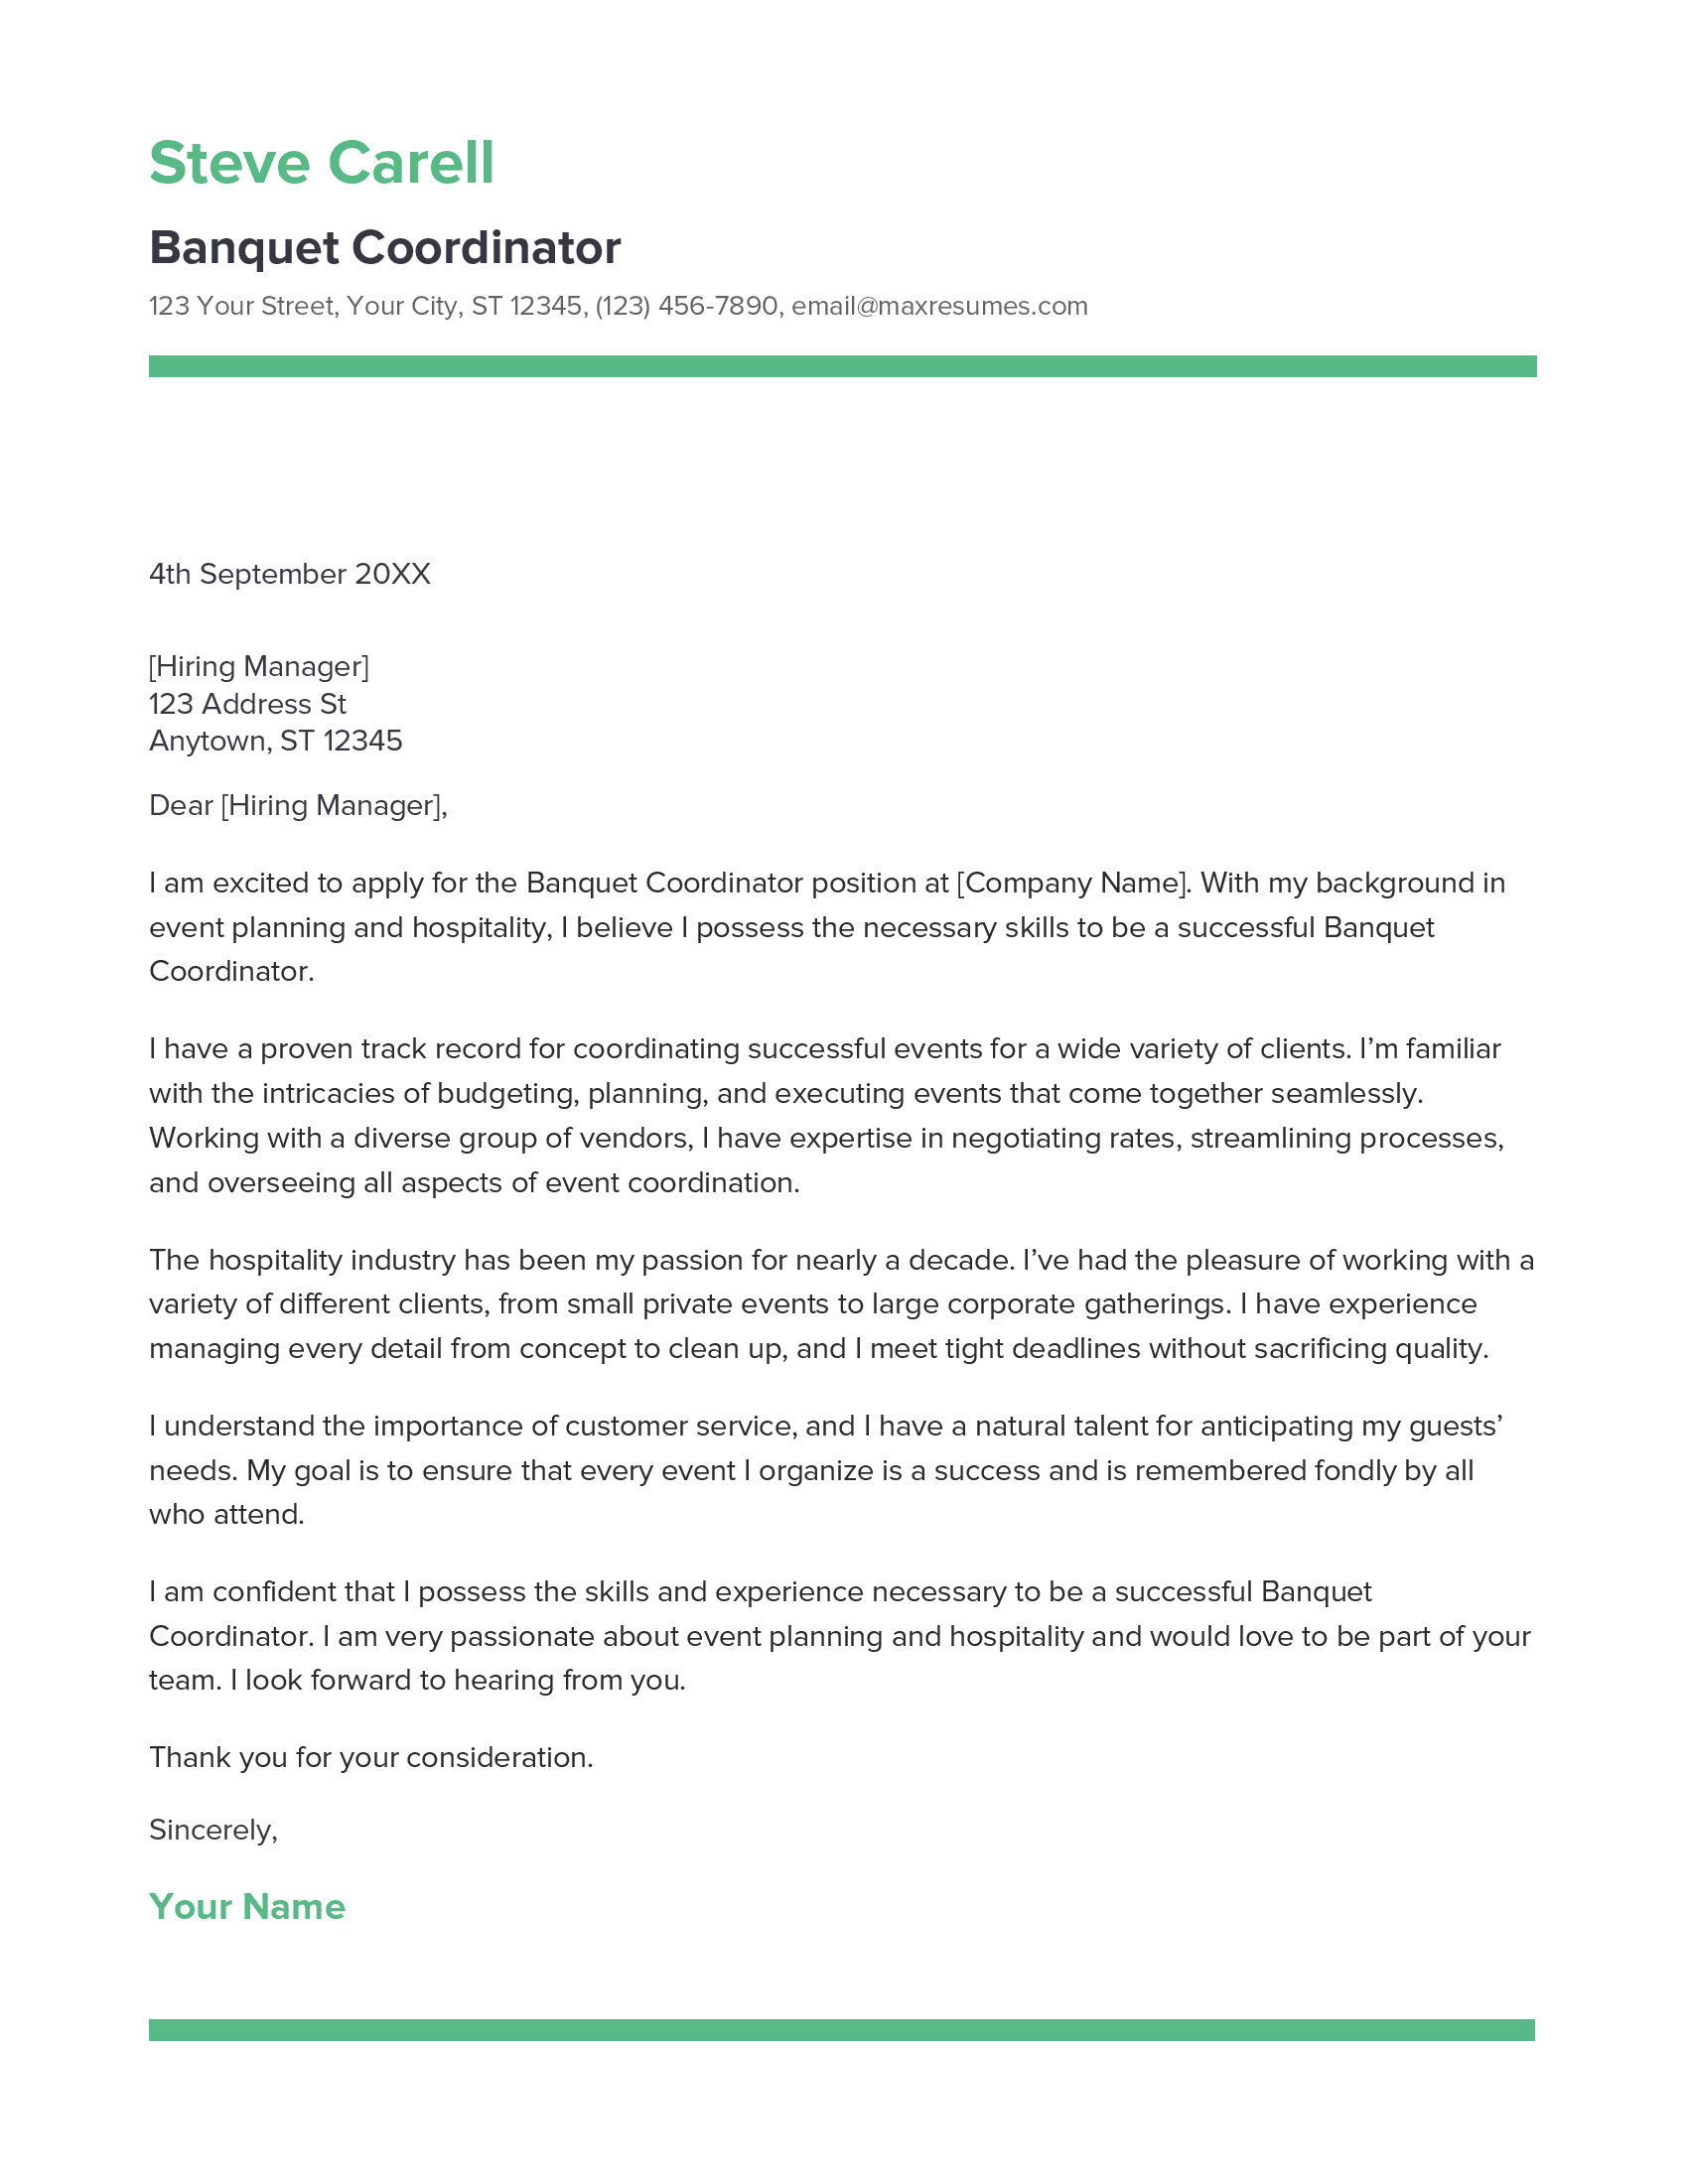 Banquet Coordinator Cover Letter Example